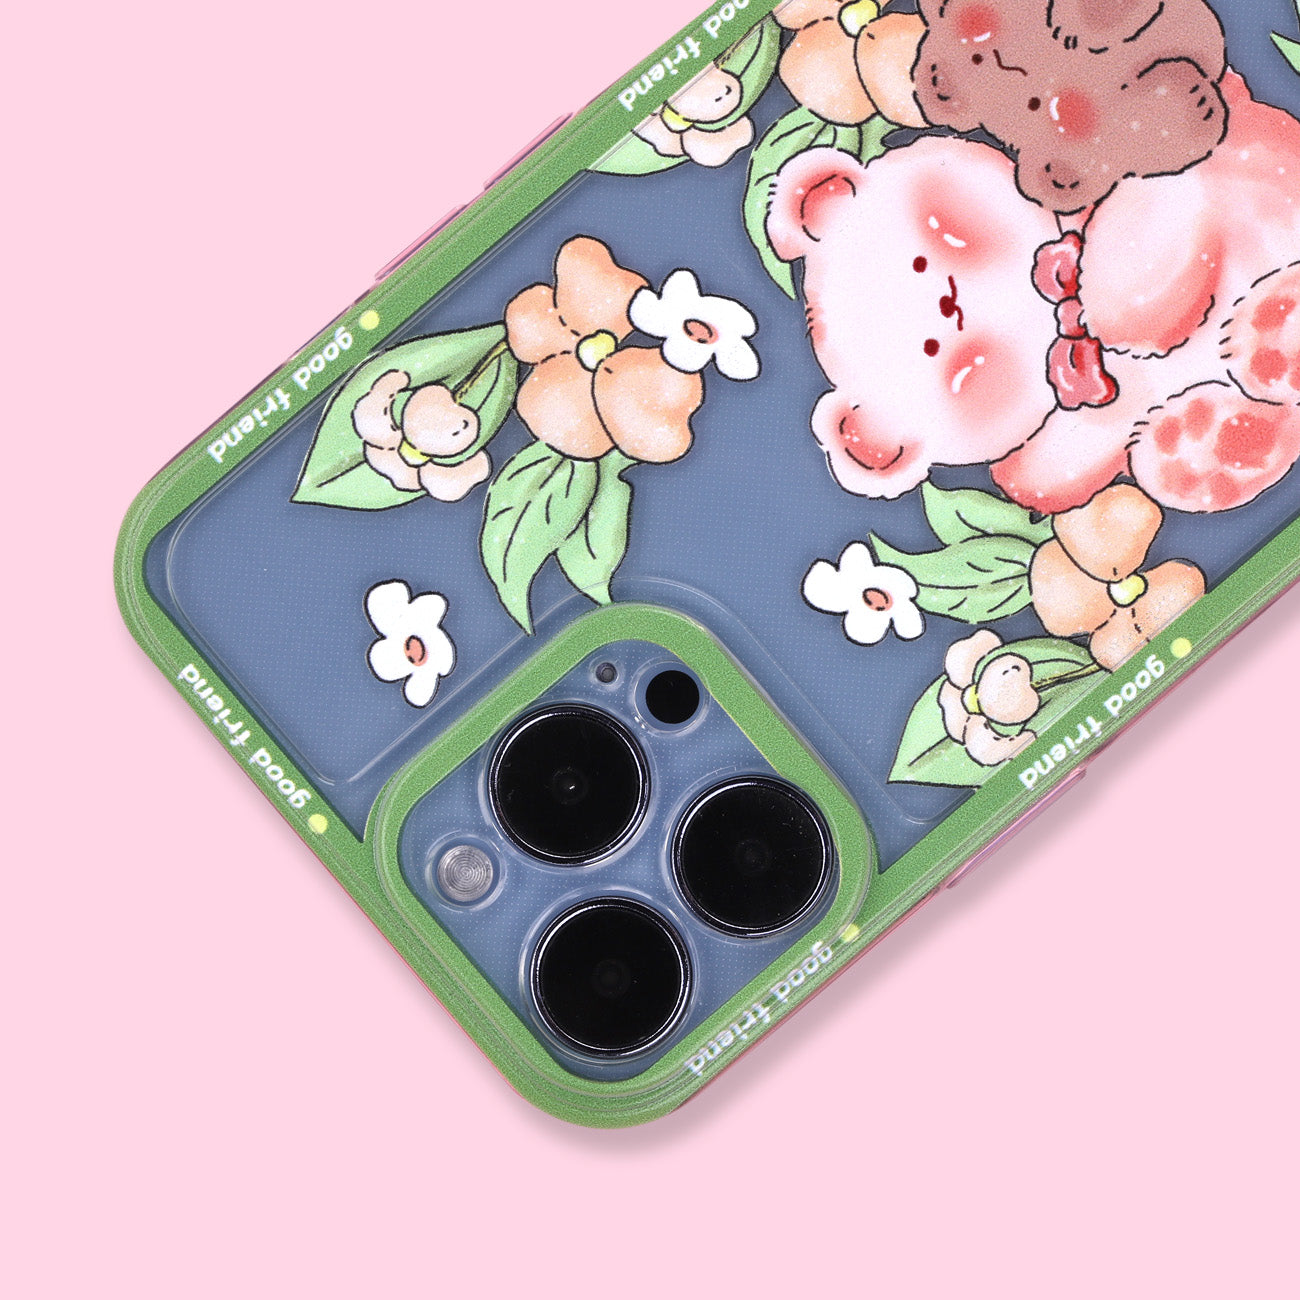 iPhone 13 Pro Max Case - Flowering Bear - Stationery Pal